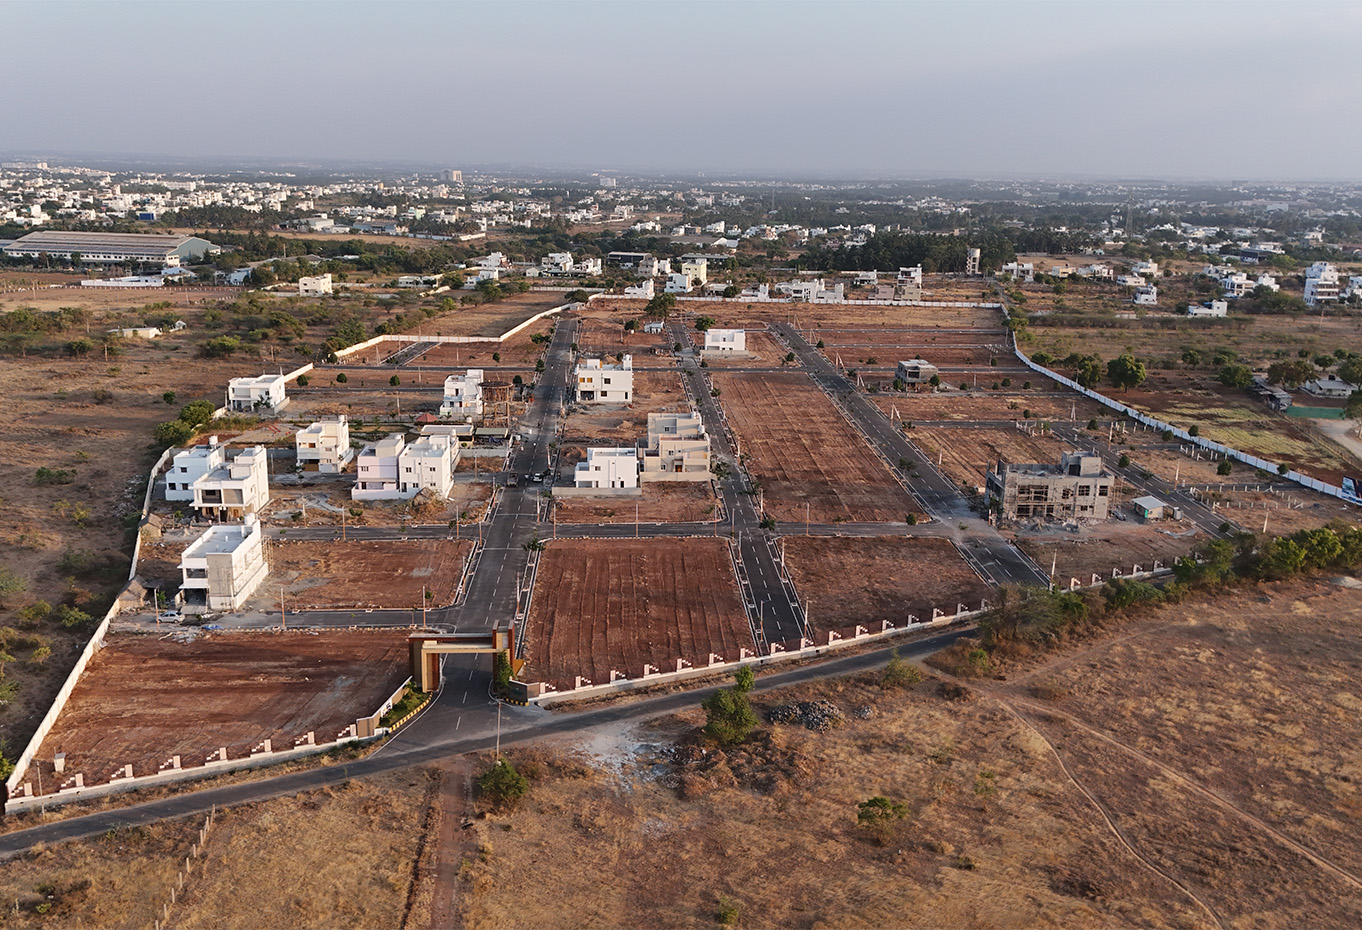 Coral residency images - Green Field Housing India